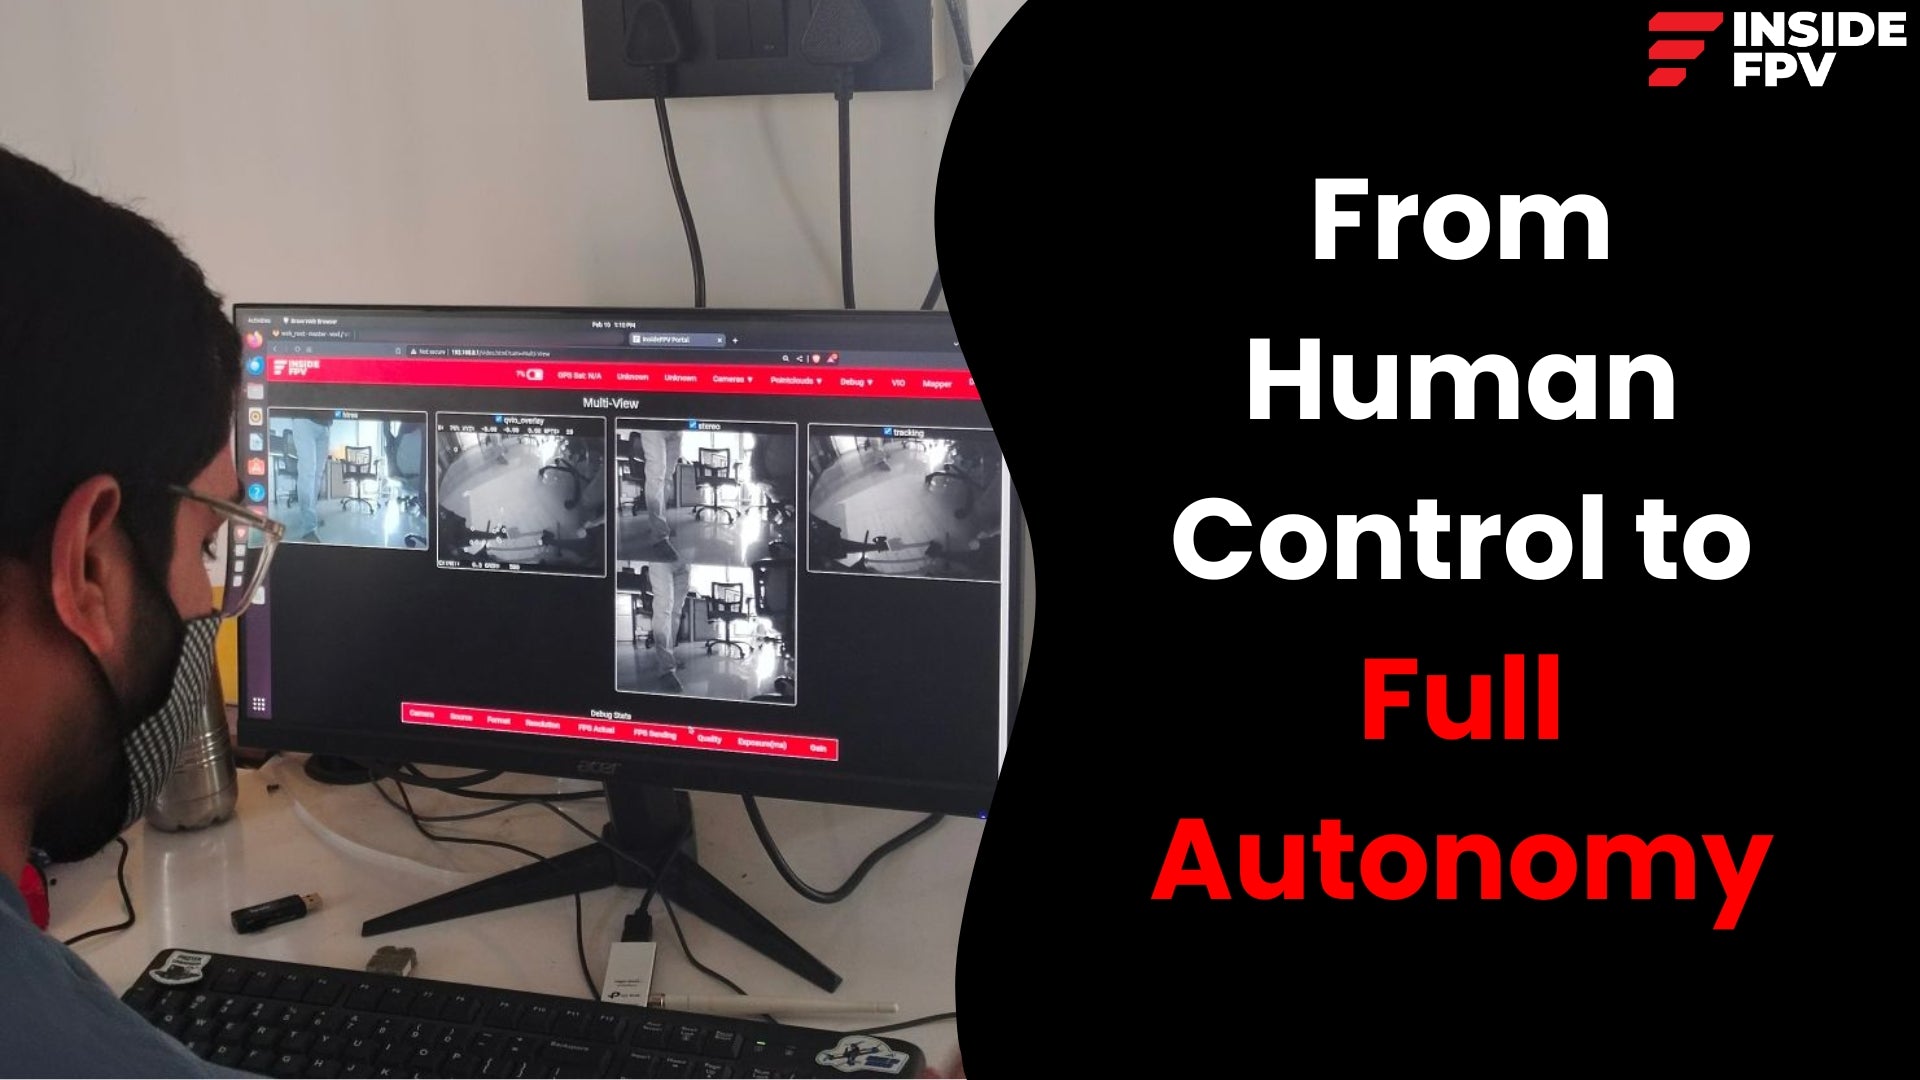 From Human Control to Full Autonomy